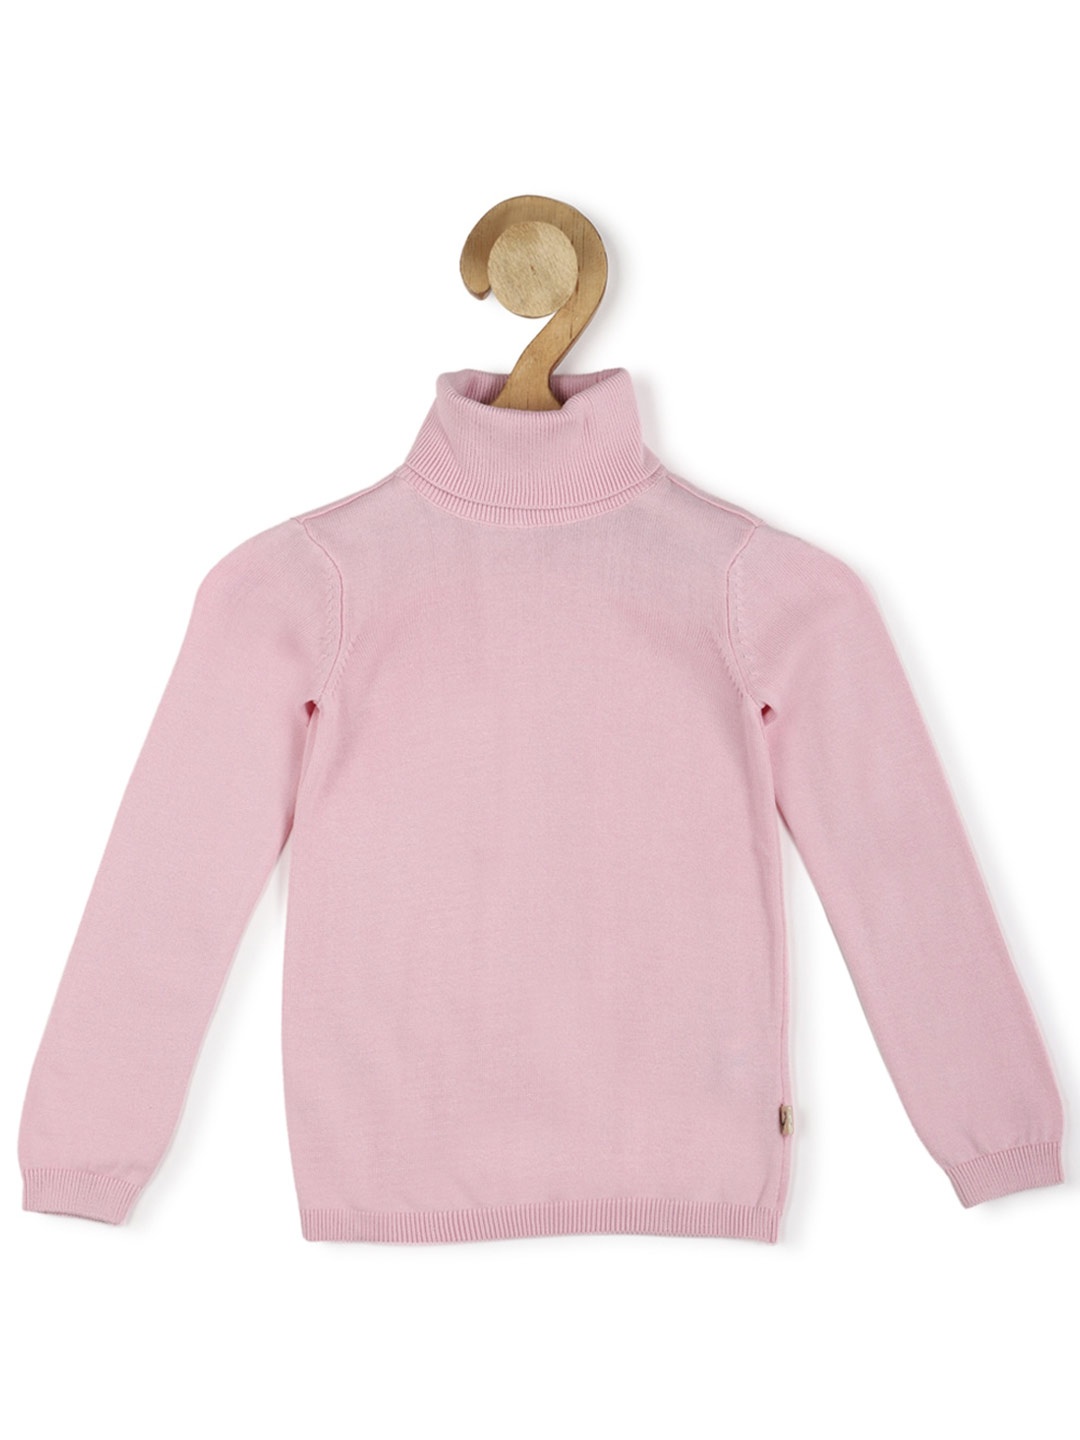 

Allen Solly Junior Girls Turtle Neck Long Sleeve Pullover Sweaters, Pink